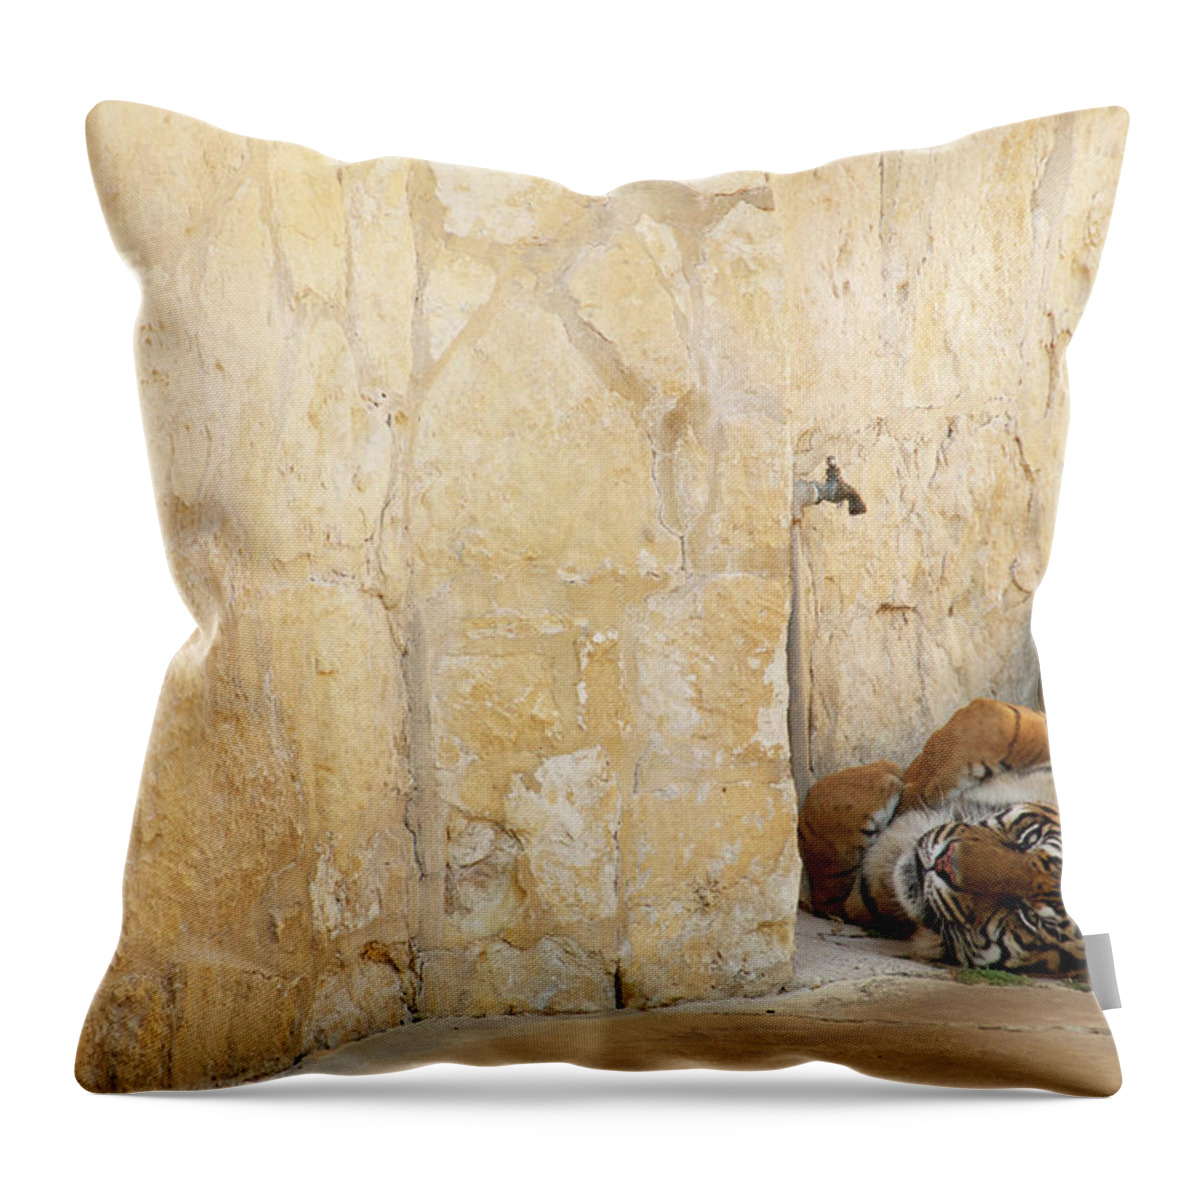 Tiger Throw Pillow featuring the photograph Just Chillin' by Melissa Southern